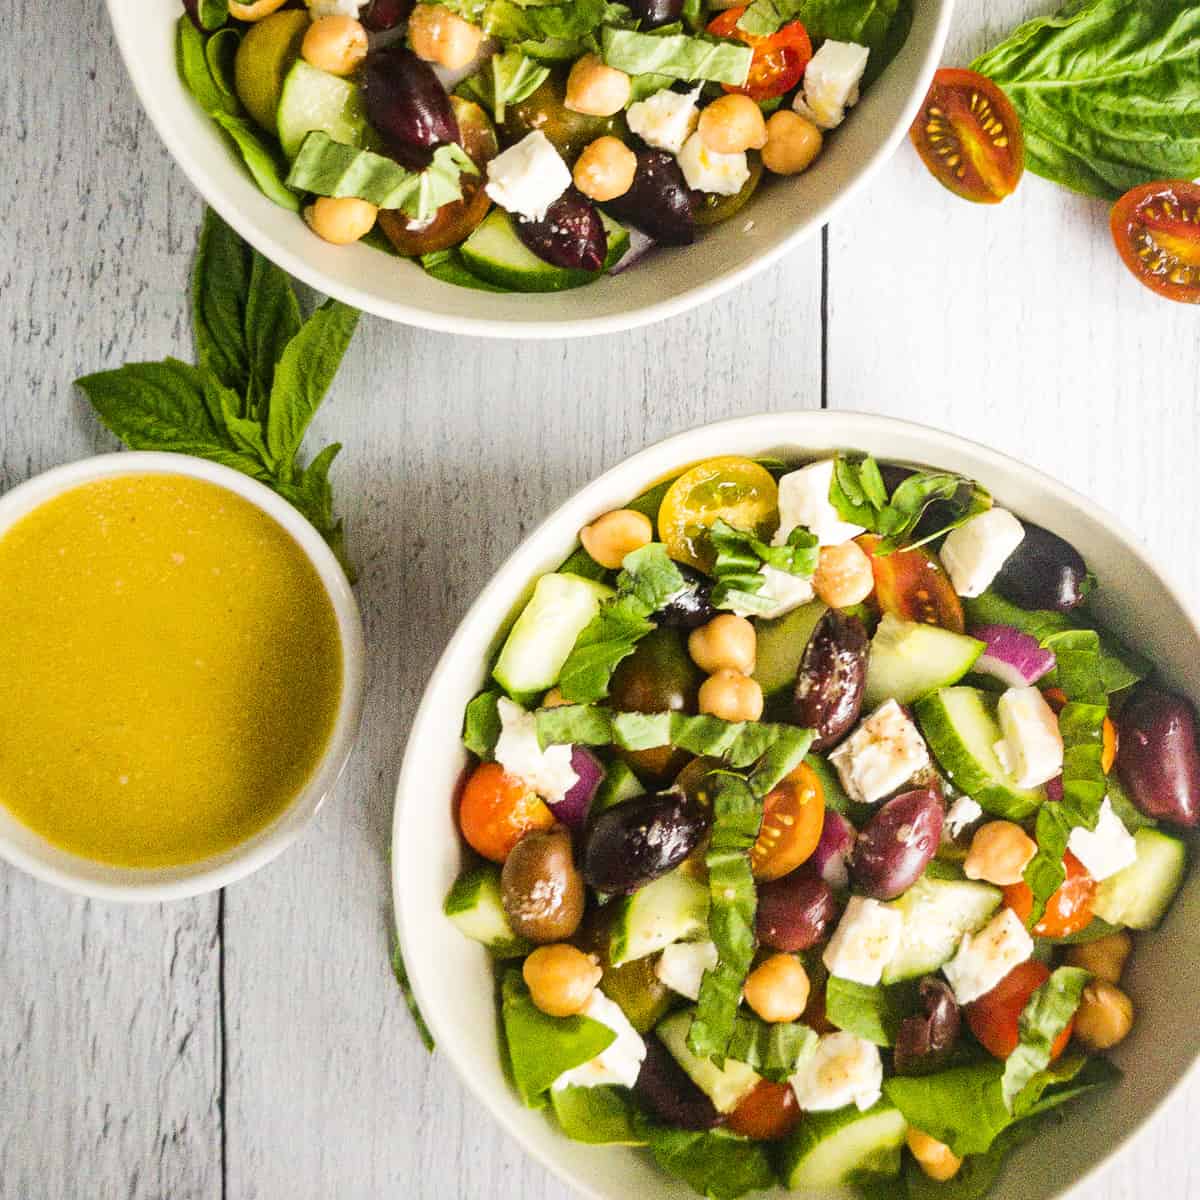 Two bowls of salad with a small bowl of dressing next to them.